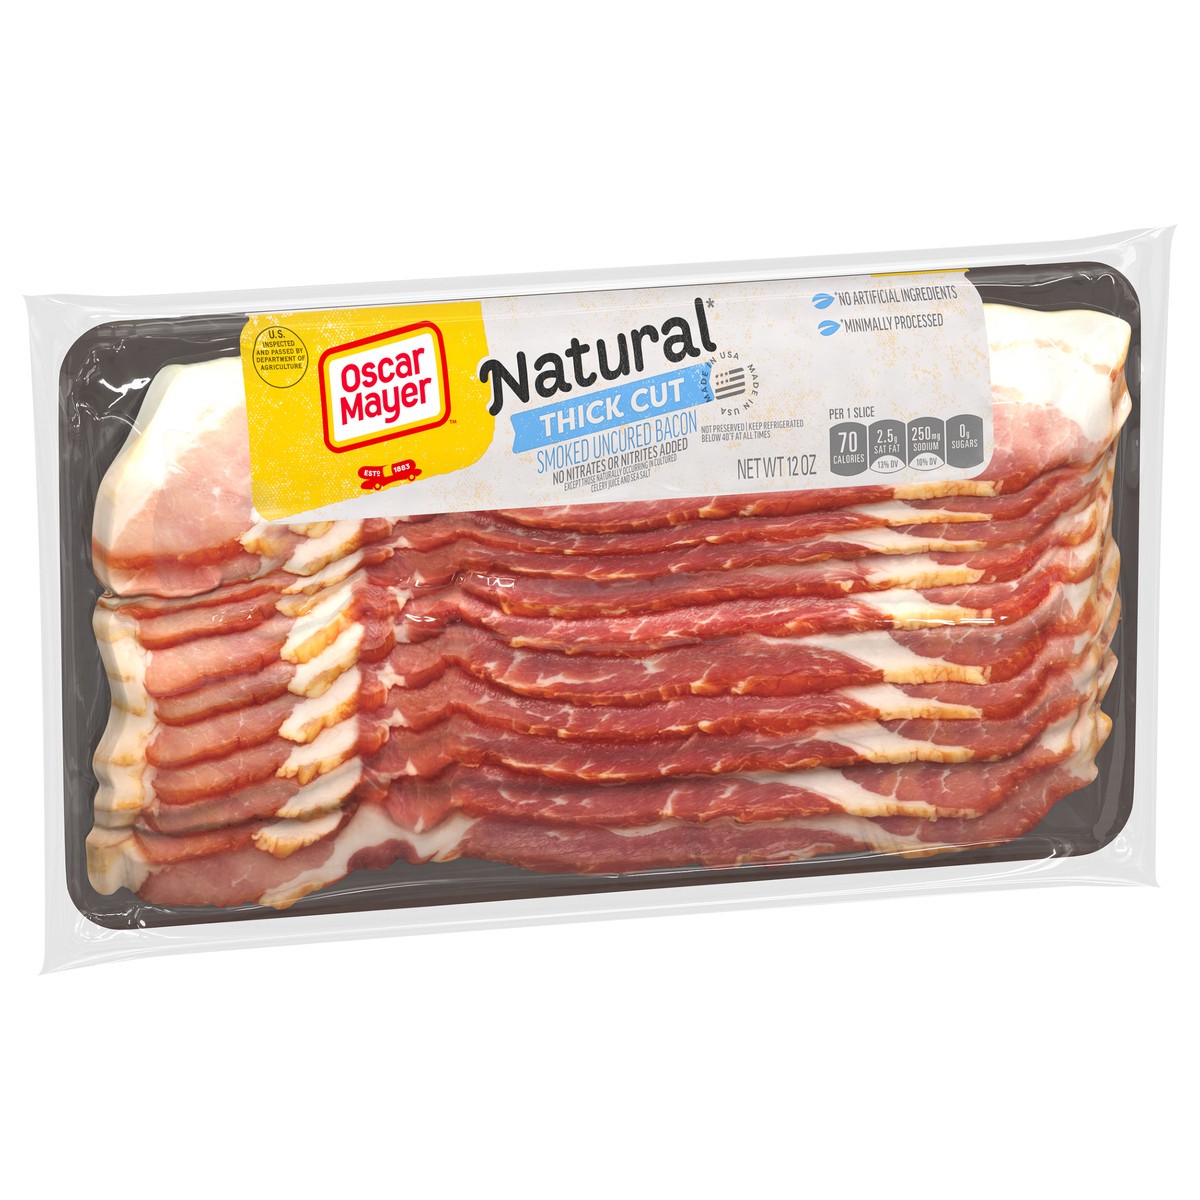 slide 9 of 9, Oscar Mayer Natural Thick Cut Smoked Uncured Bacon, 12 oz Pack, 8-10 slices, 12 oz